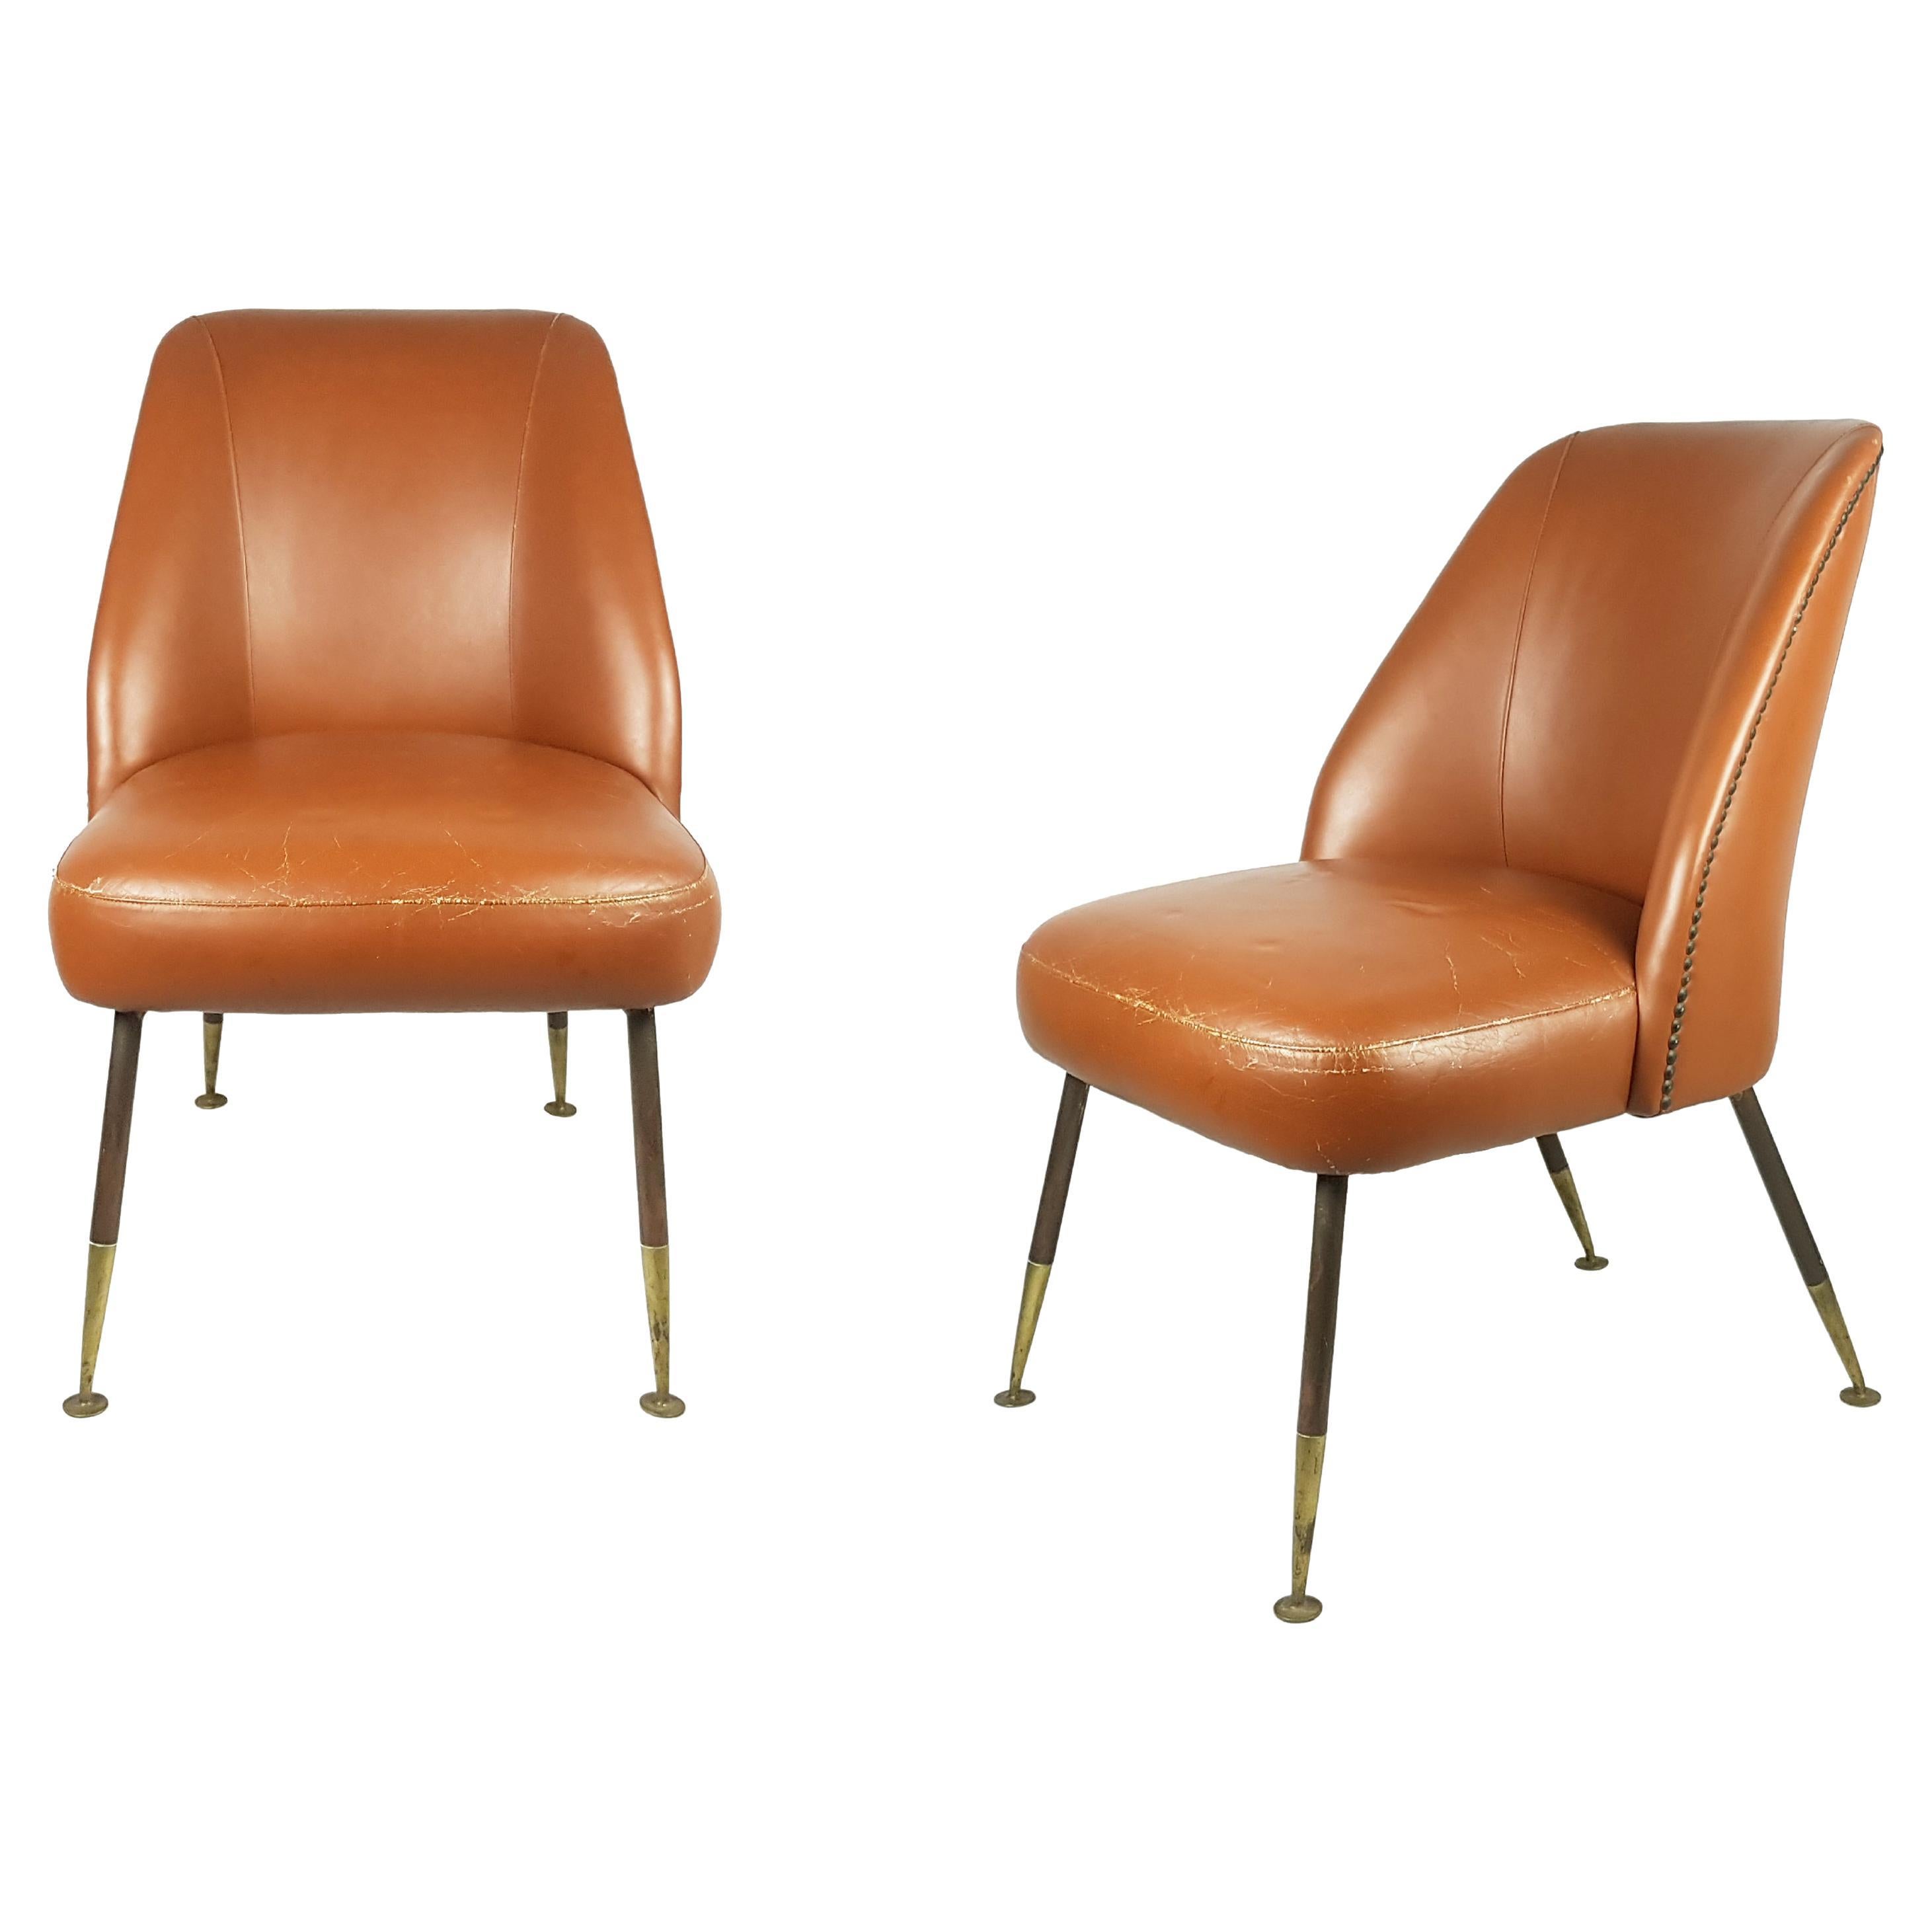 Brown Leather & Brass "Campanula" Chairs by C. Pagani for Arflex, 1952, Set of 2